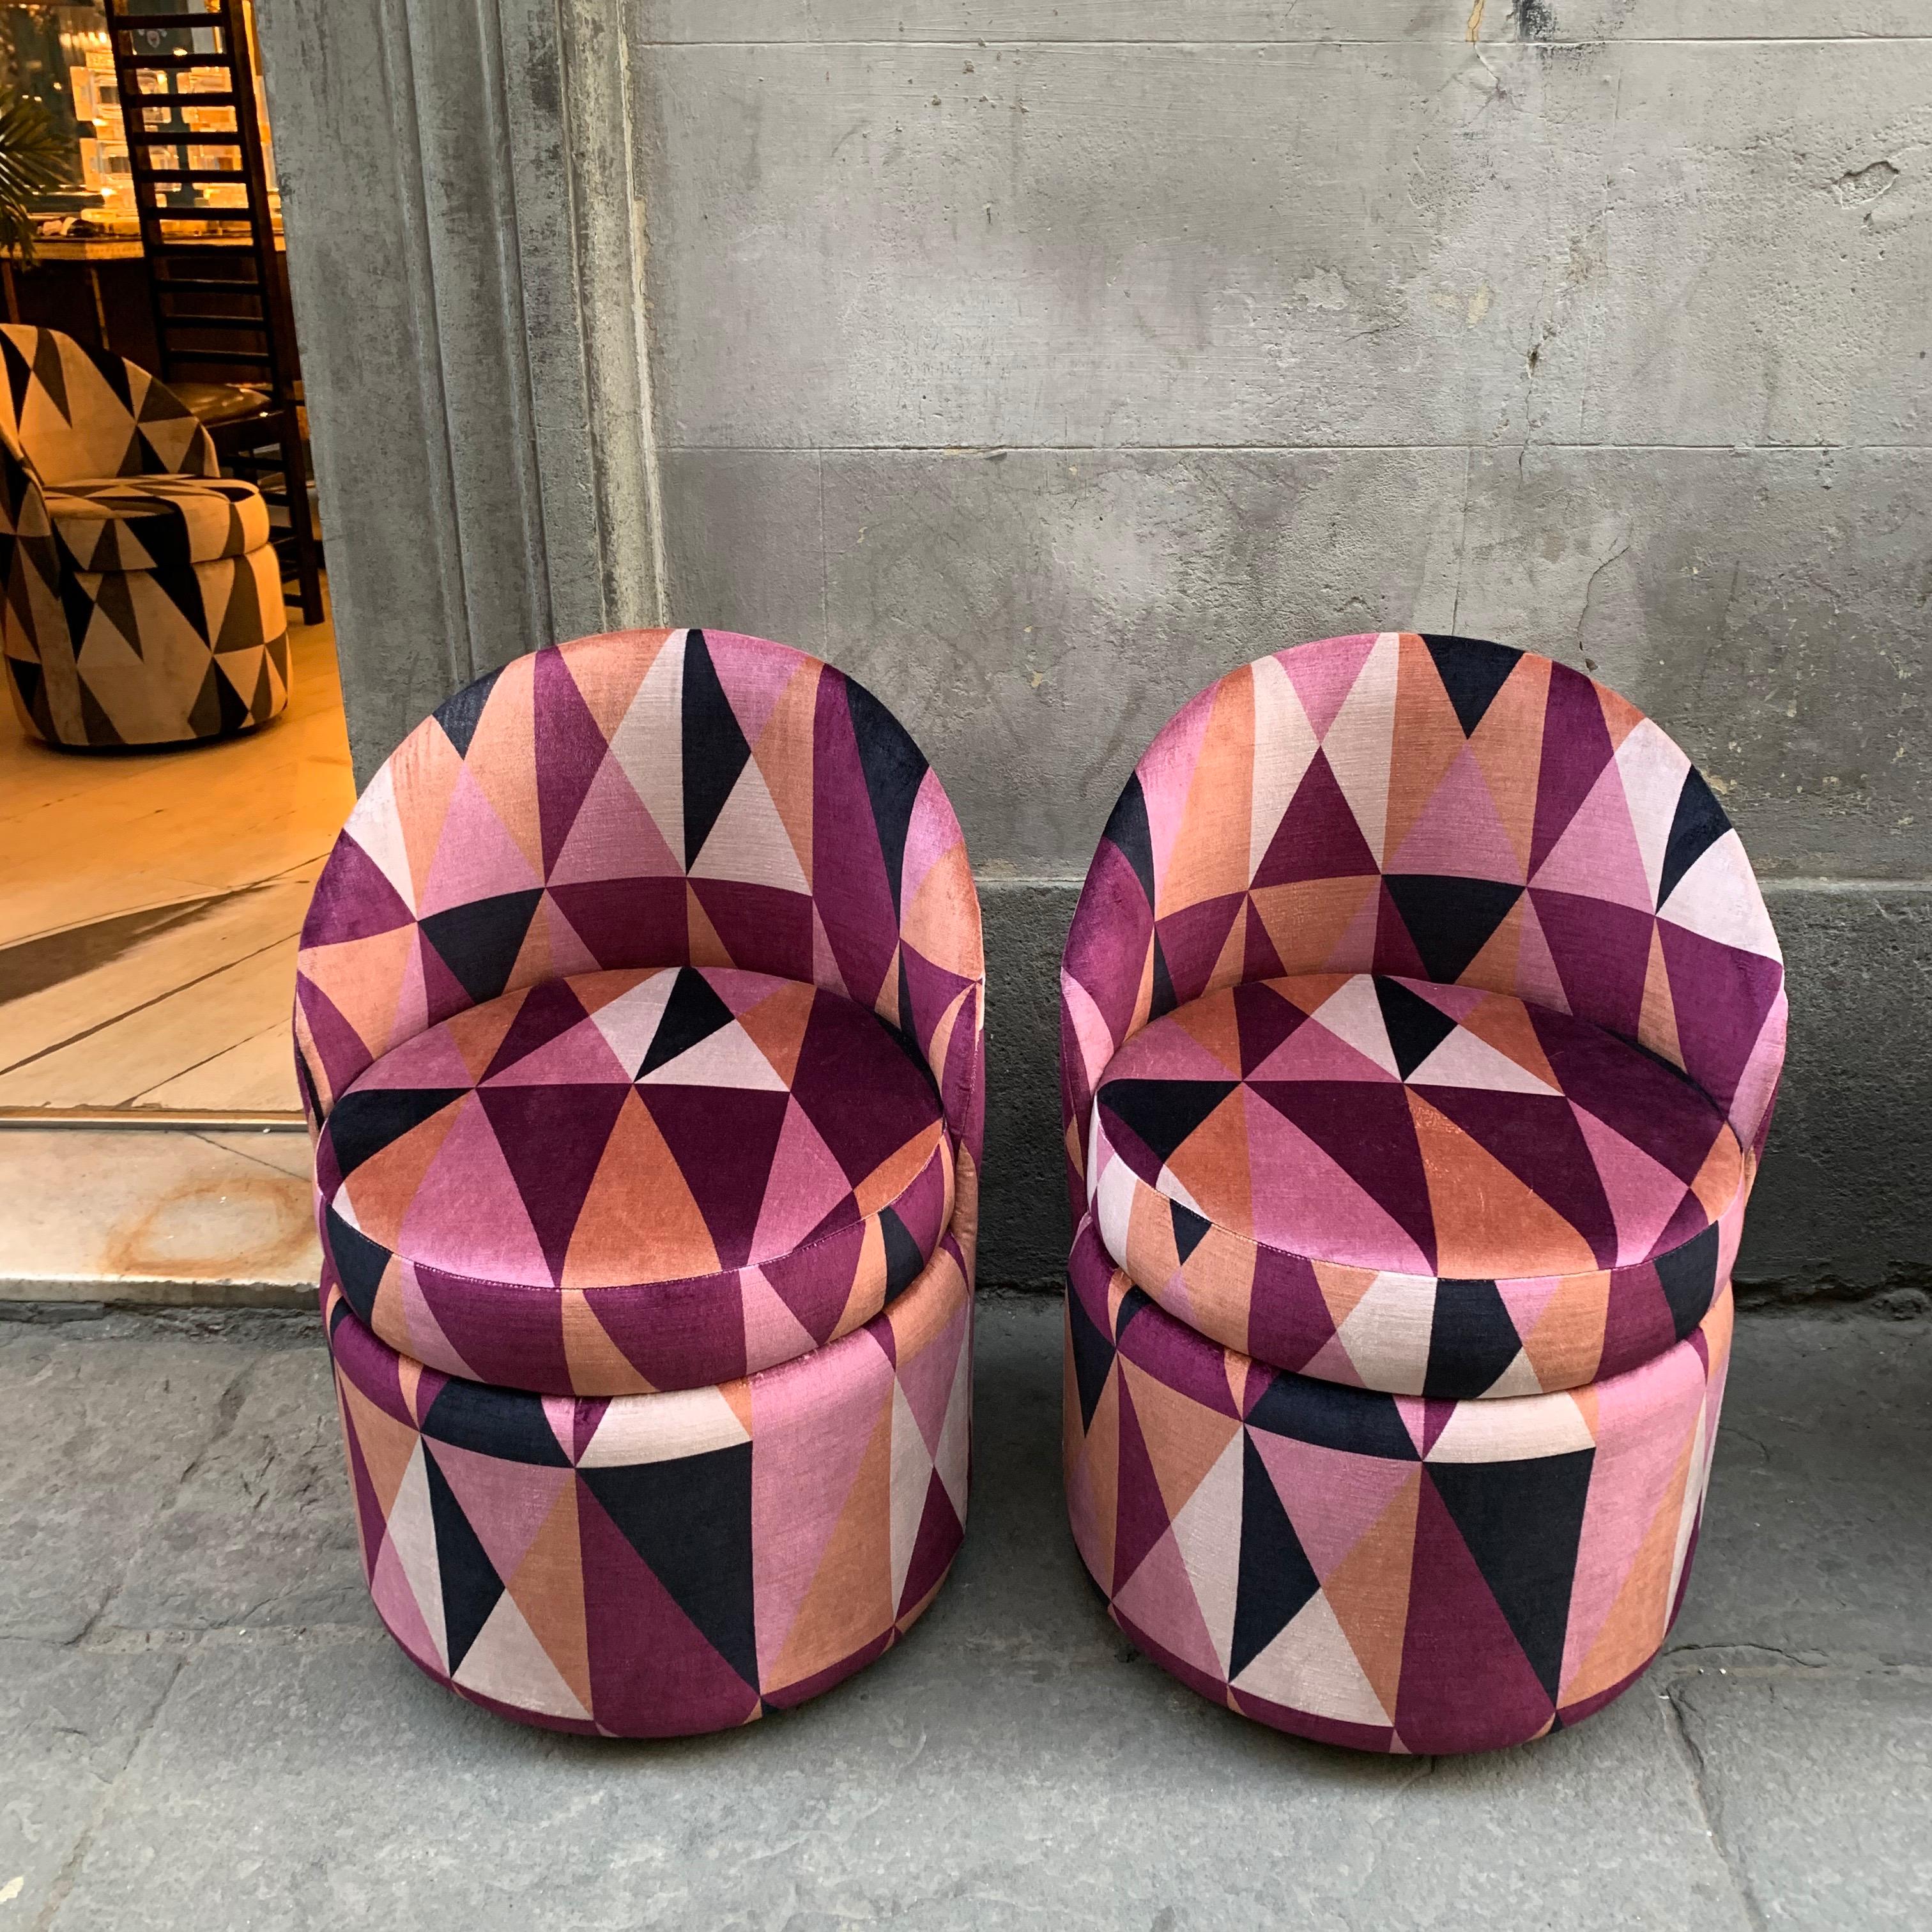 Set of three round Art Deco club chairs with Kirkby geometric design velvet. The chairs are from Art Deco era to midcentury but they are newly upholstered with Kirkby geometric velvet, two different colors, a pair with pink colors and a single chair